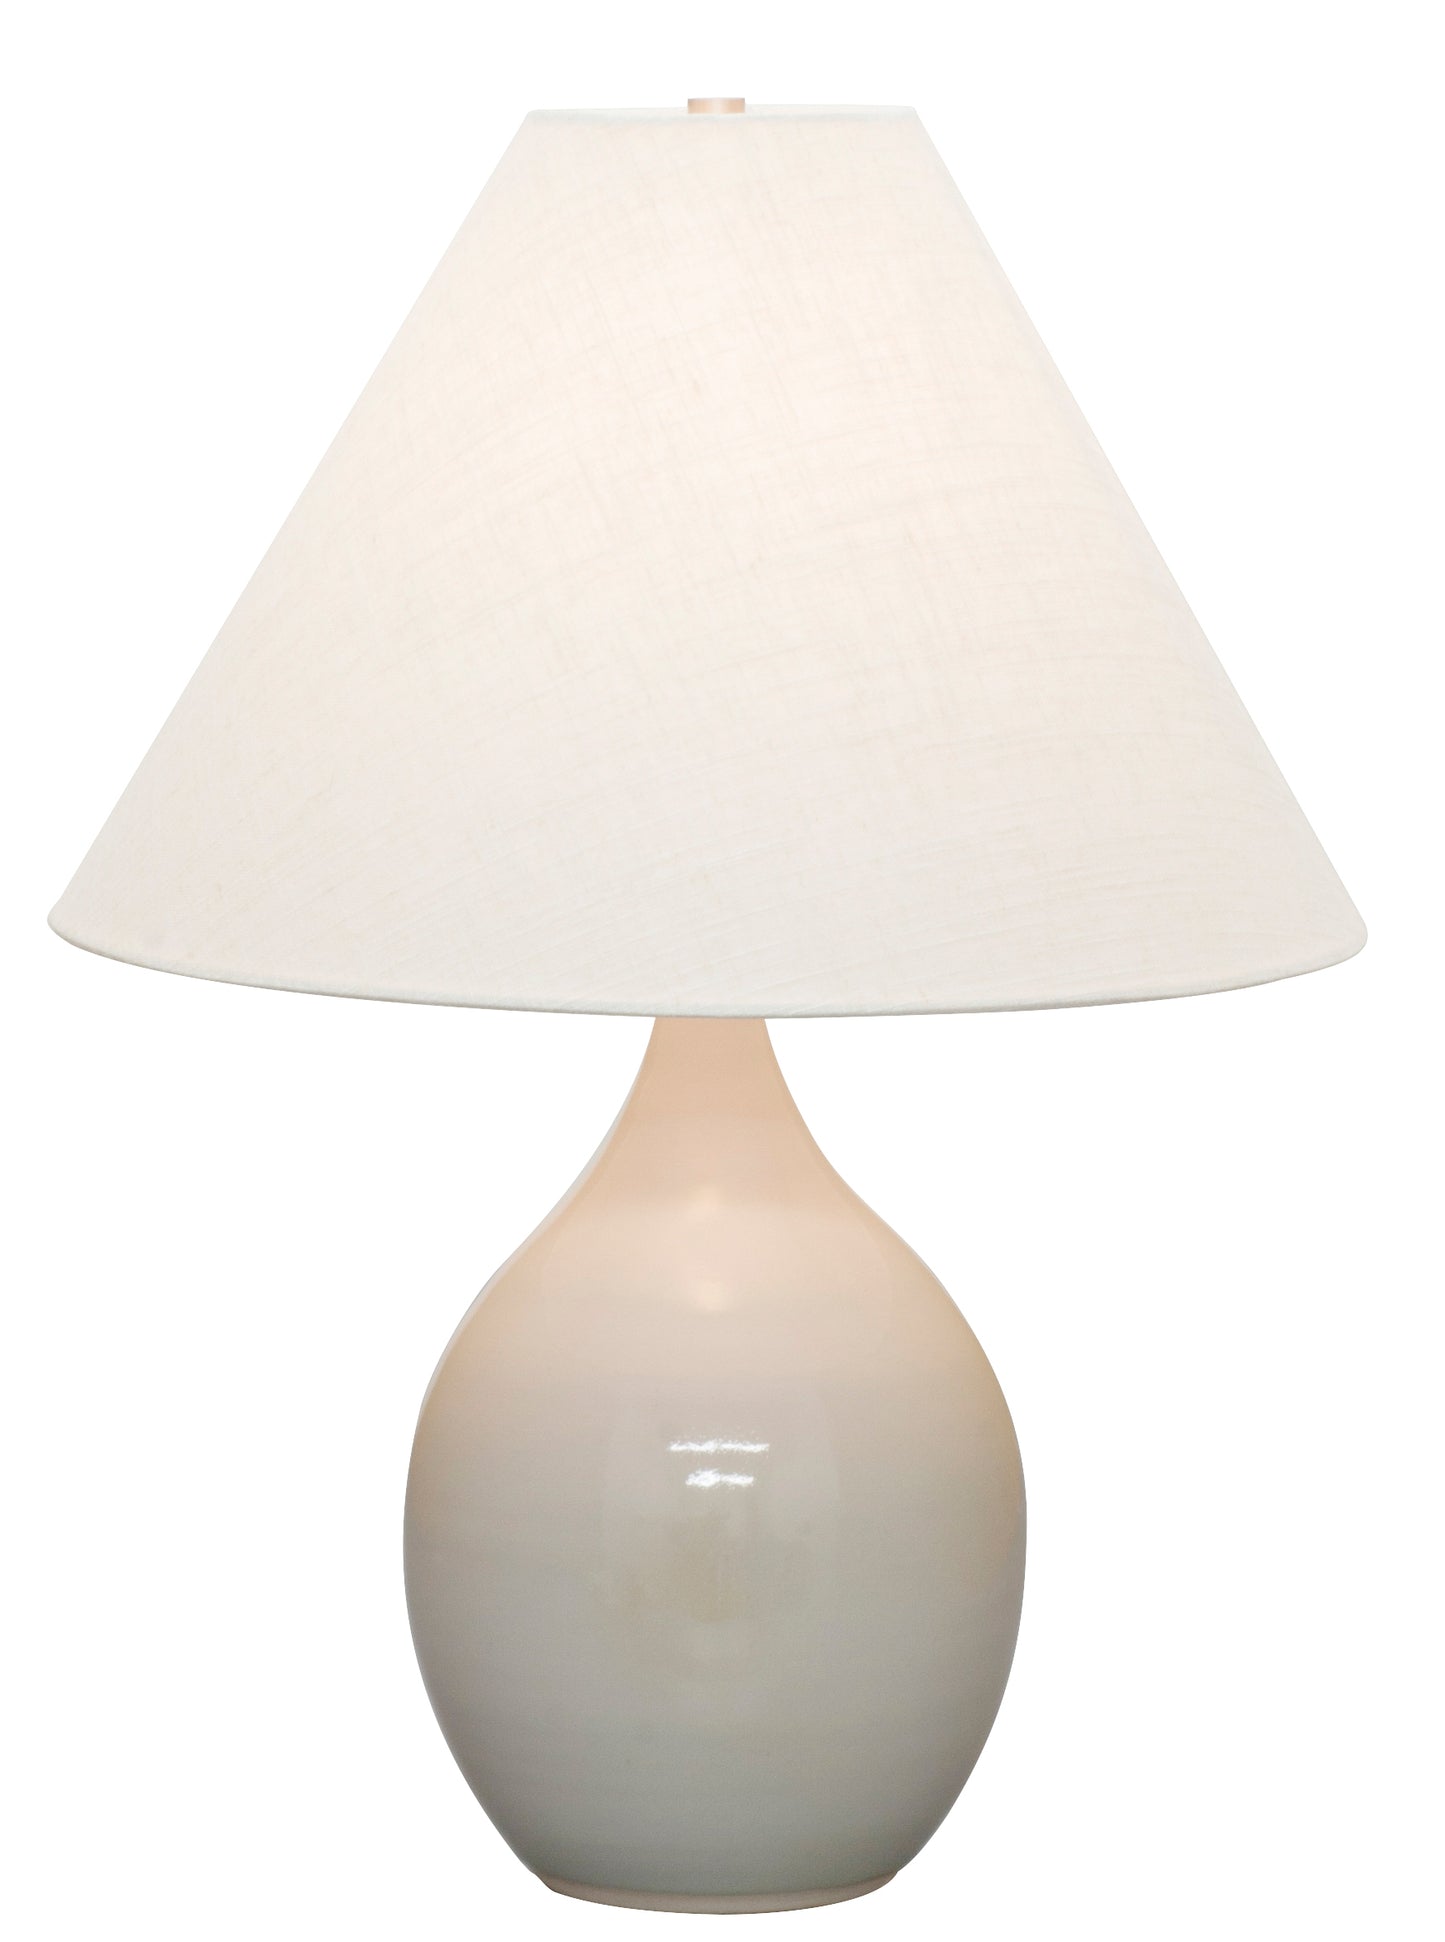 House of Troy Scatchard 22.5" Stoneware Table Lamp in Gray Gloss GS300-GG